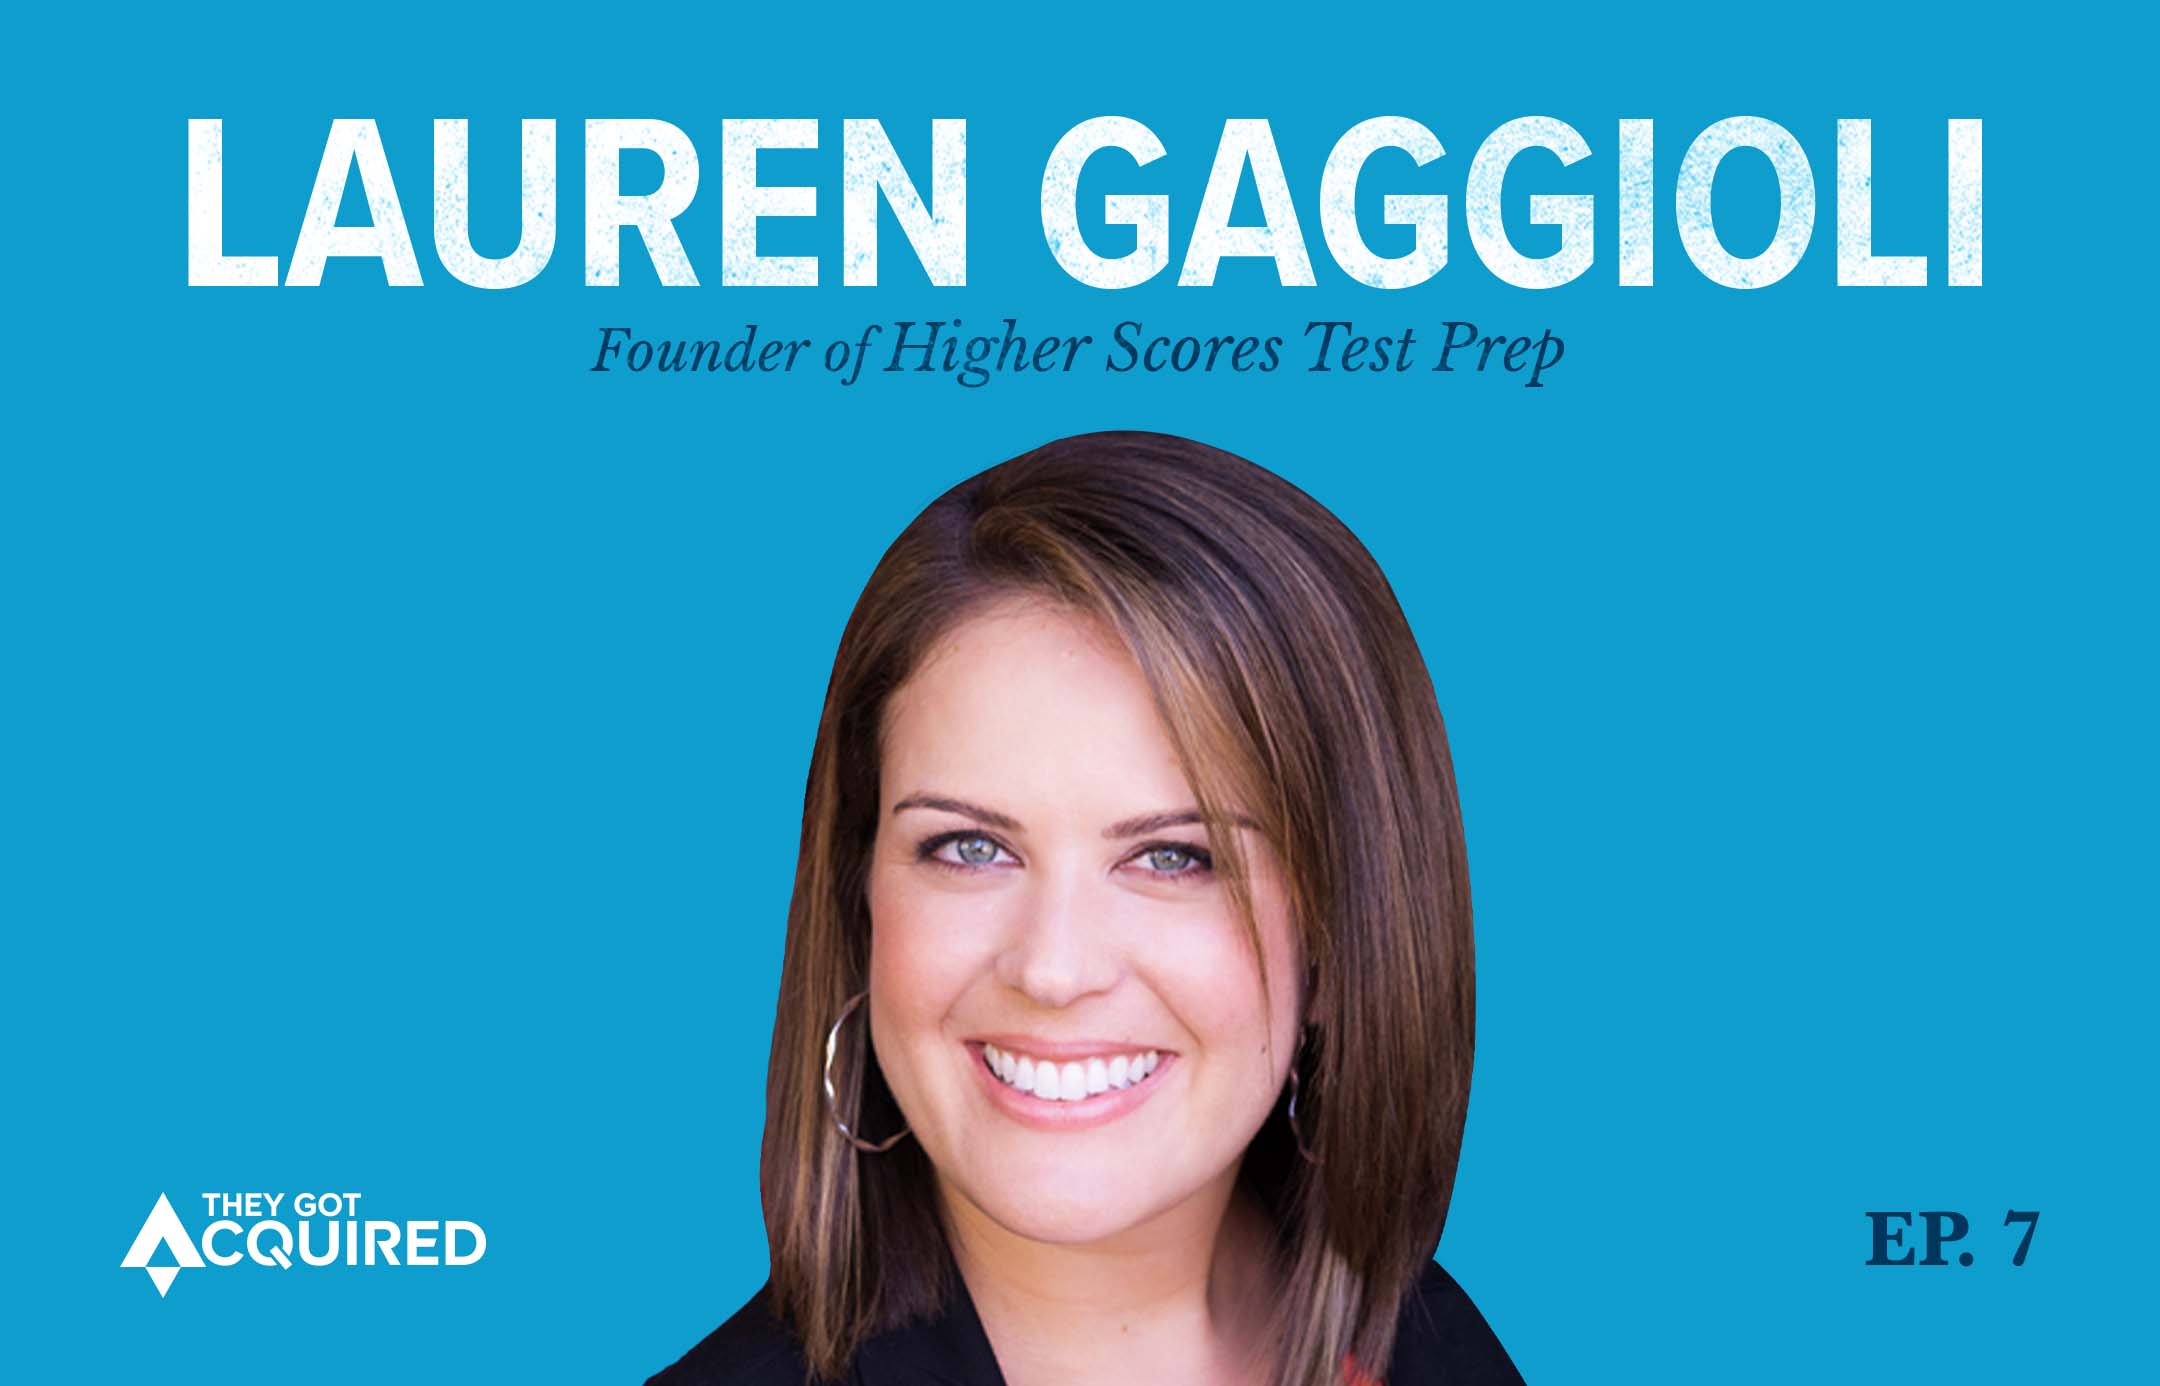 Lauren Gaggioli, founder of They Got Acquired